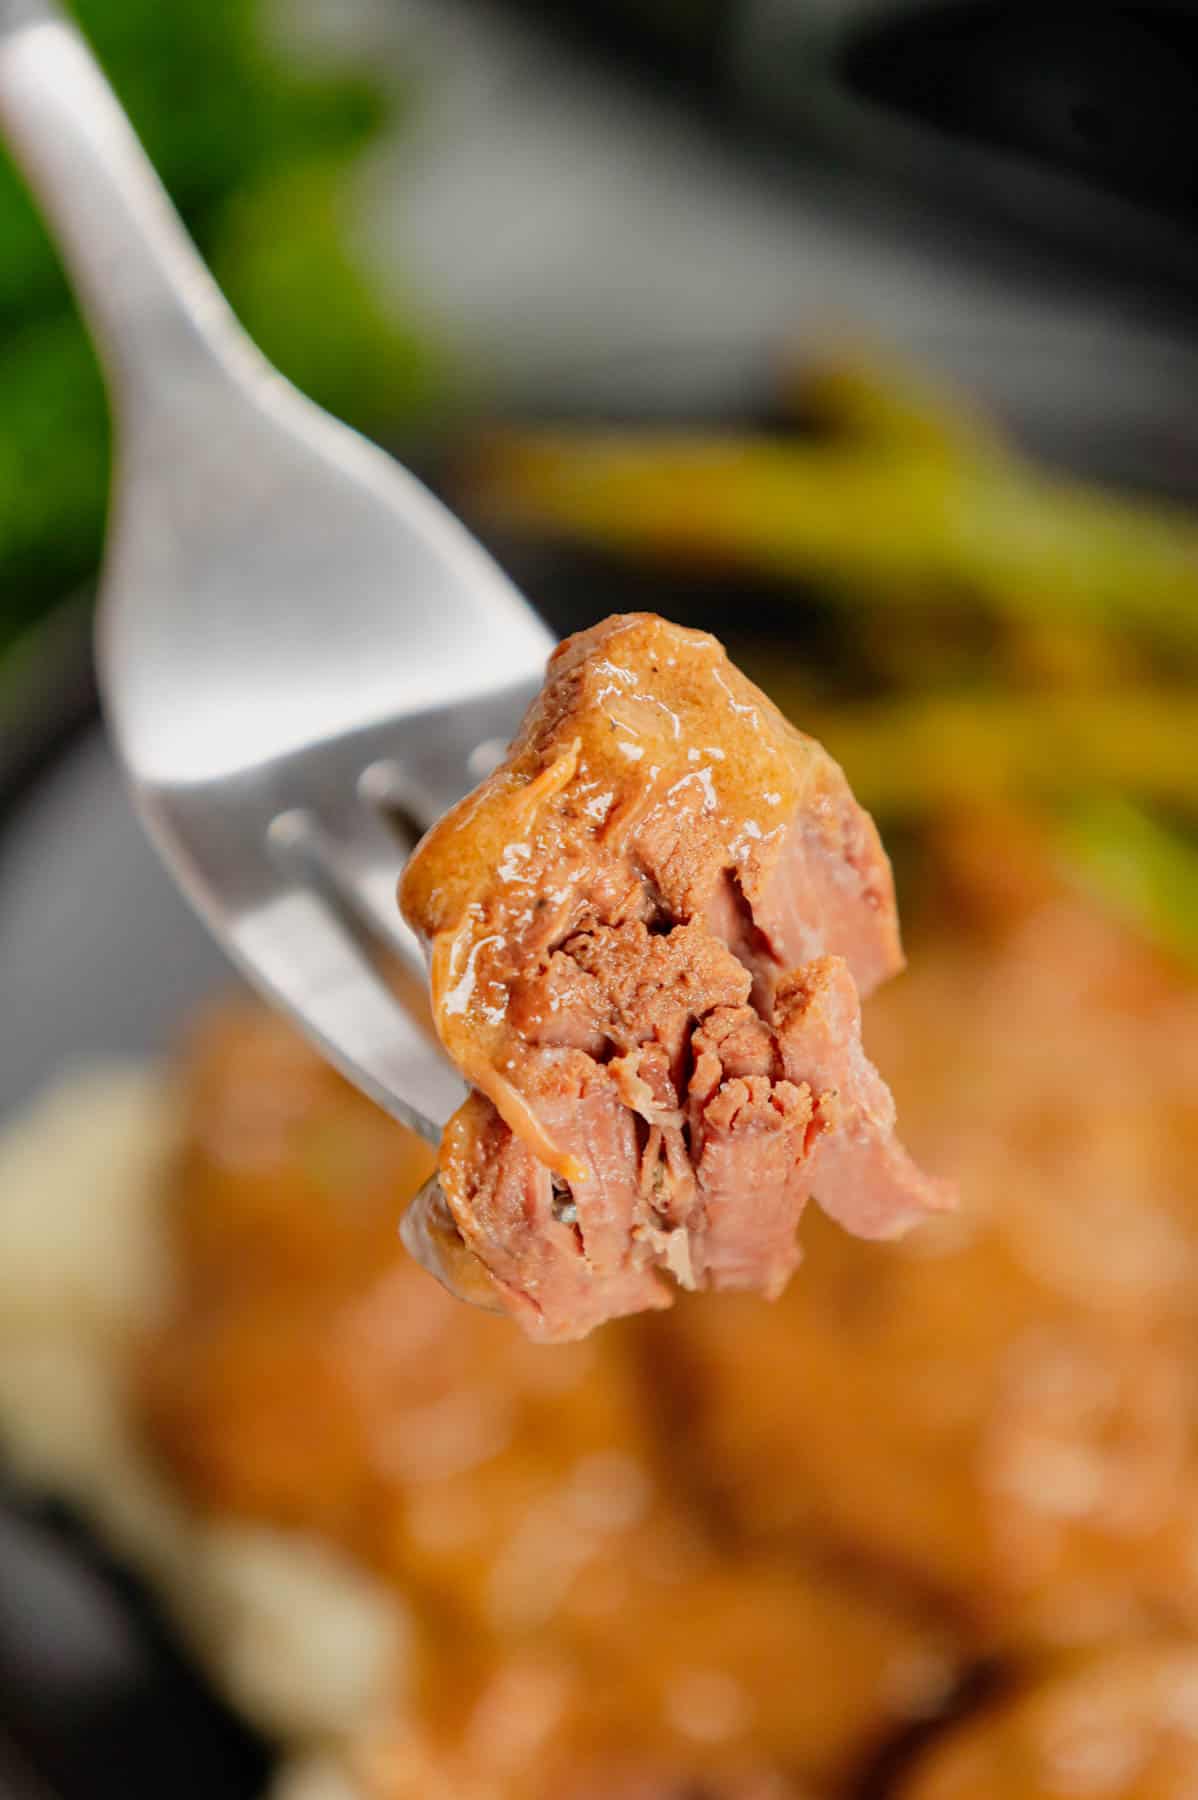 Crock Pot Beef Tips is a delicious slow cooker dinner recipe made with chunks of stewing beef, sliced onions, cream of mushroom soup, beef broth and beef gravy mix.